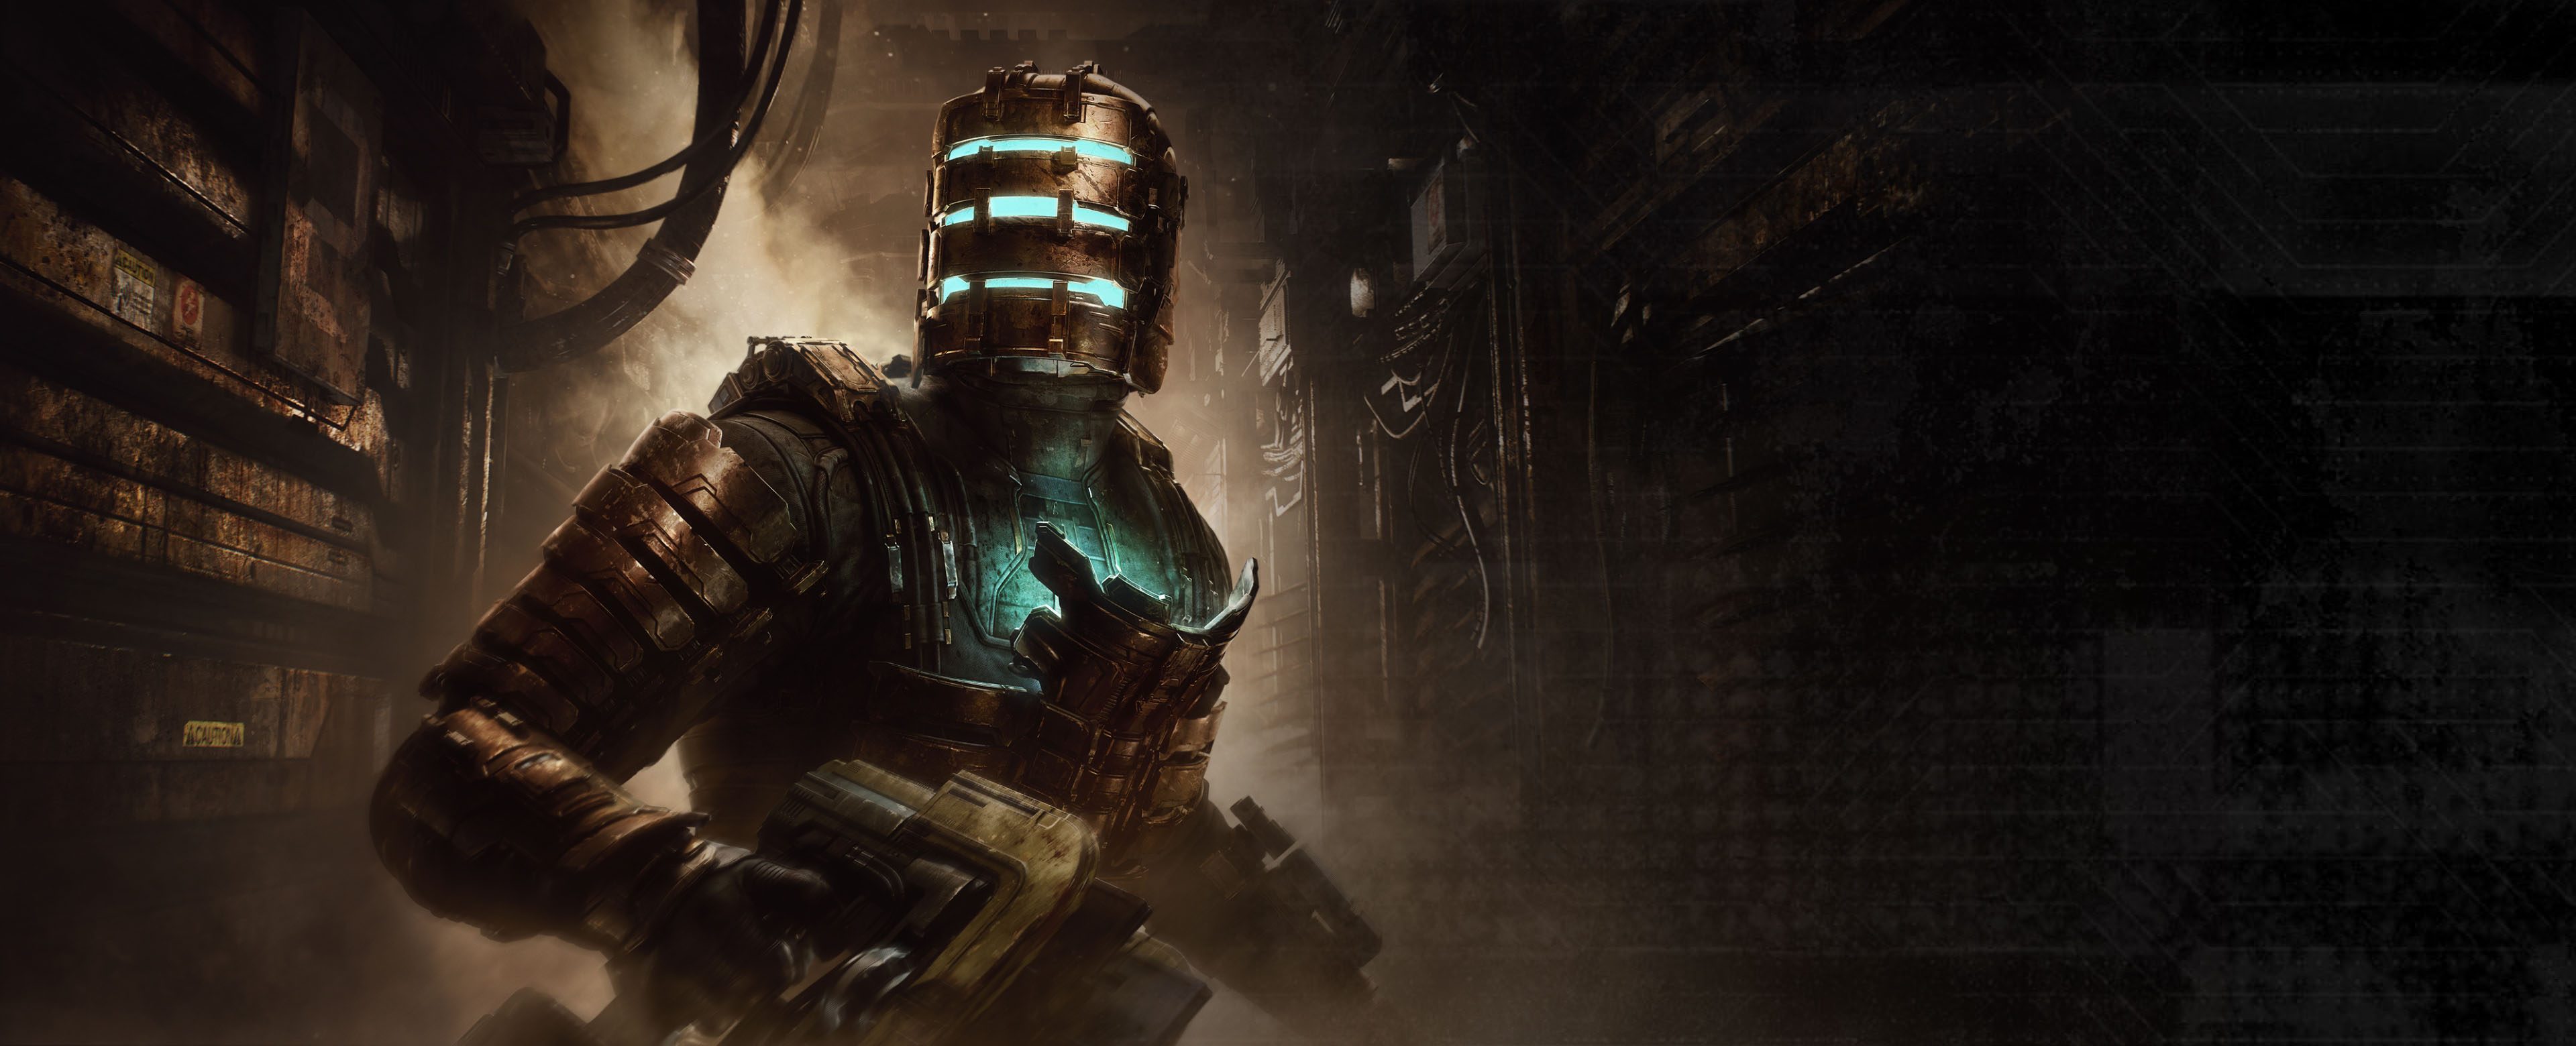 Dead Space Wallpapers on WallpaperDog